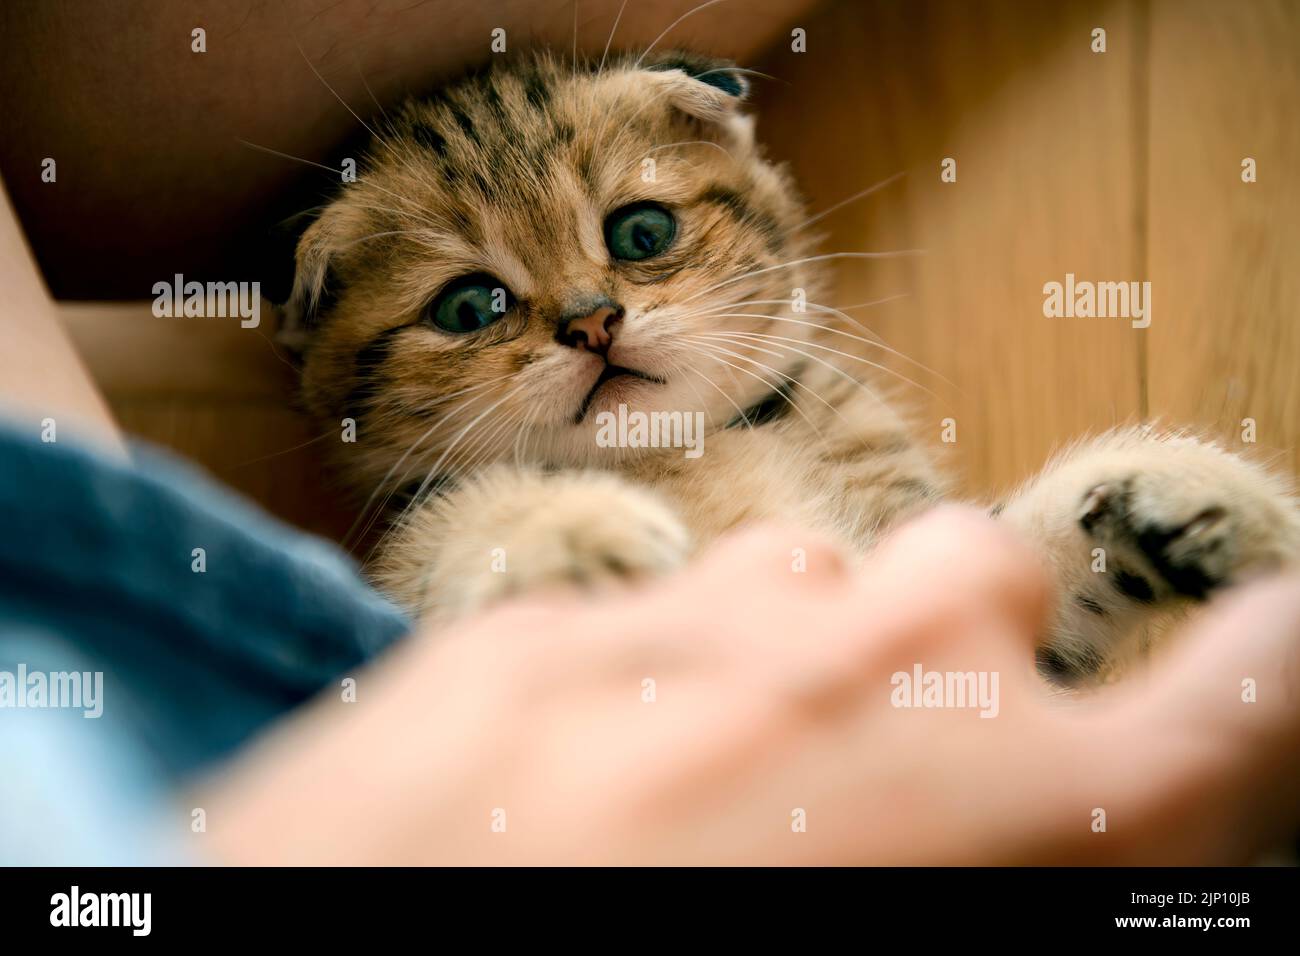 Kitten lying on the wooden floor in the house and looking straight up. Little cat playing with human hands. Top view and close-up. Scottish Fold tabby Stock Photo